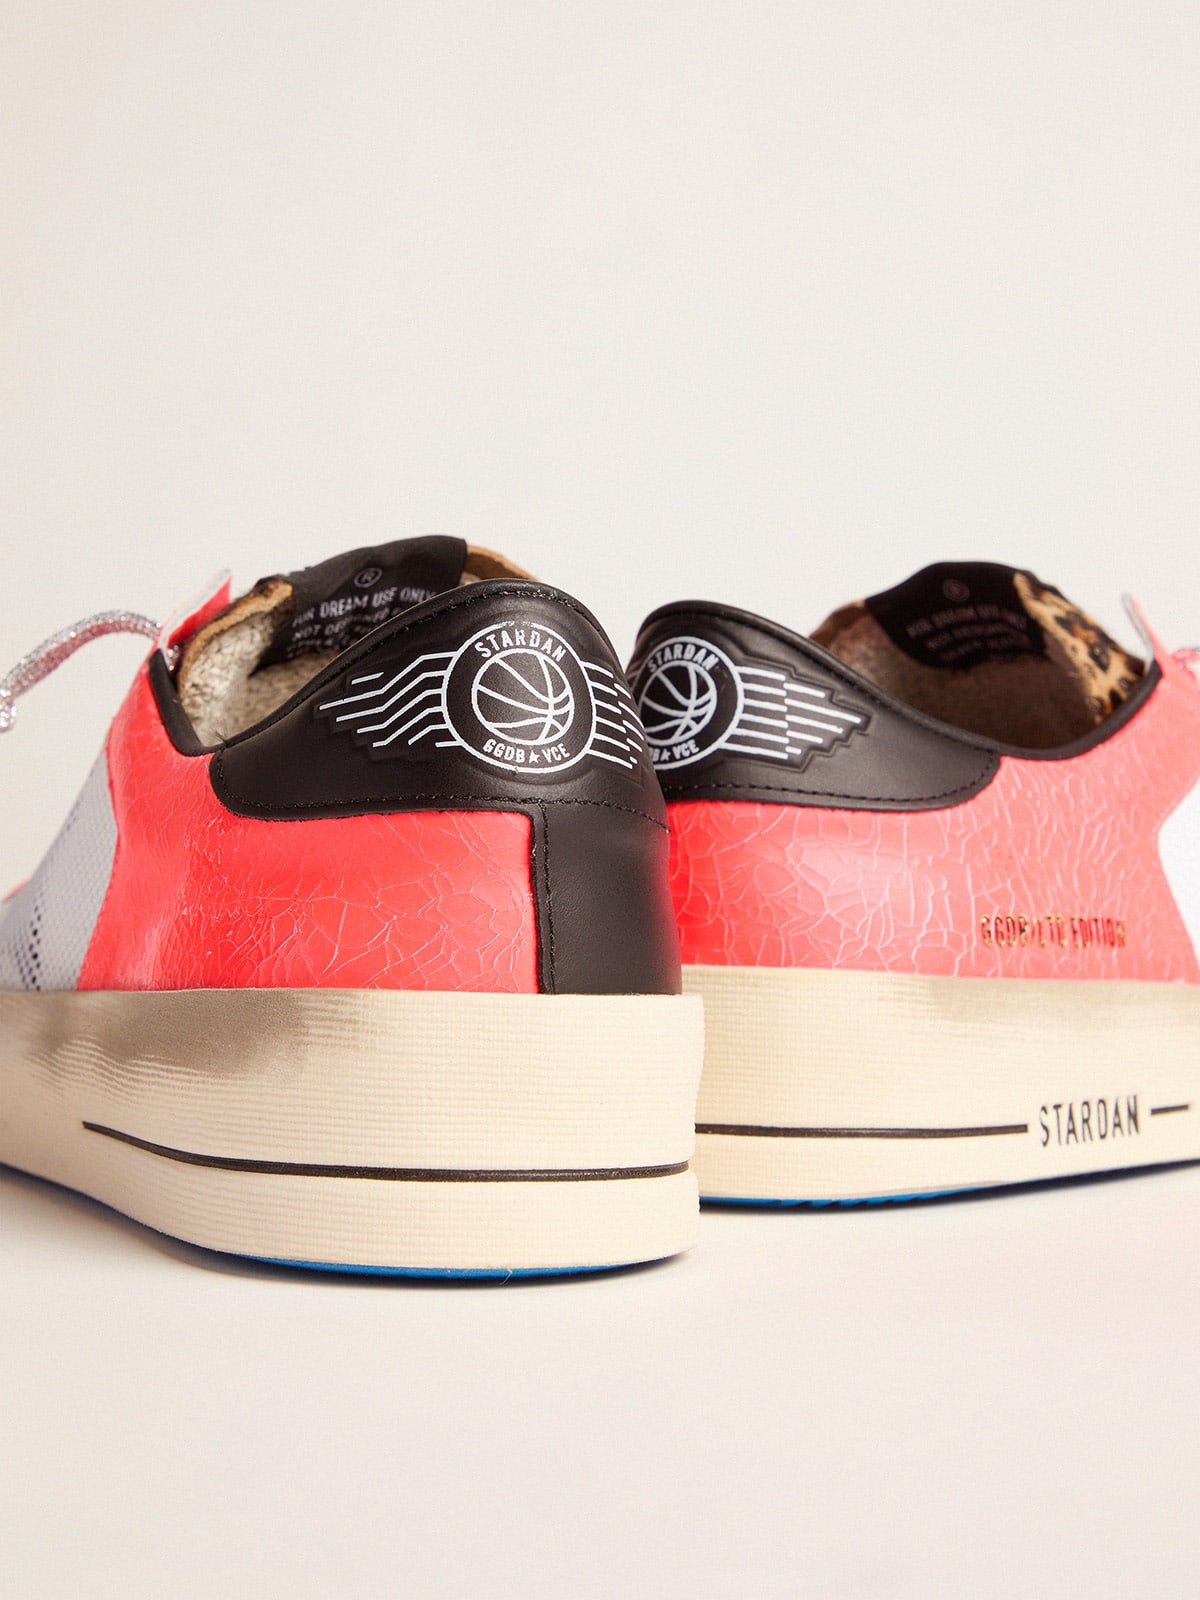 Golden Goose - Men’s LAB Limited Edition Stardan sneakers in craquelé leather and pony skin in 